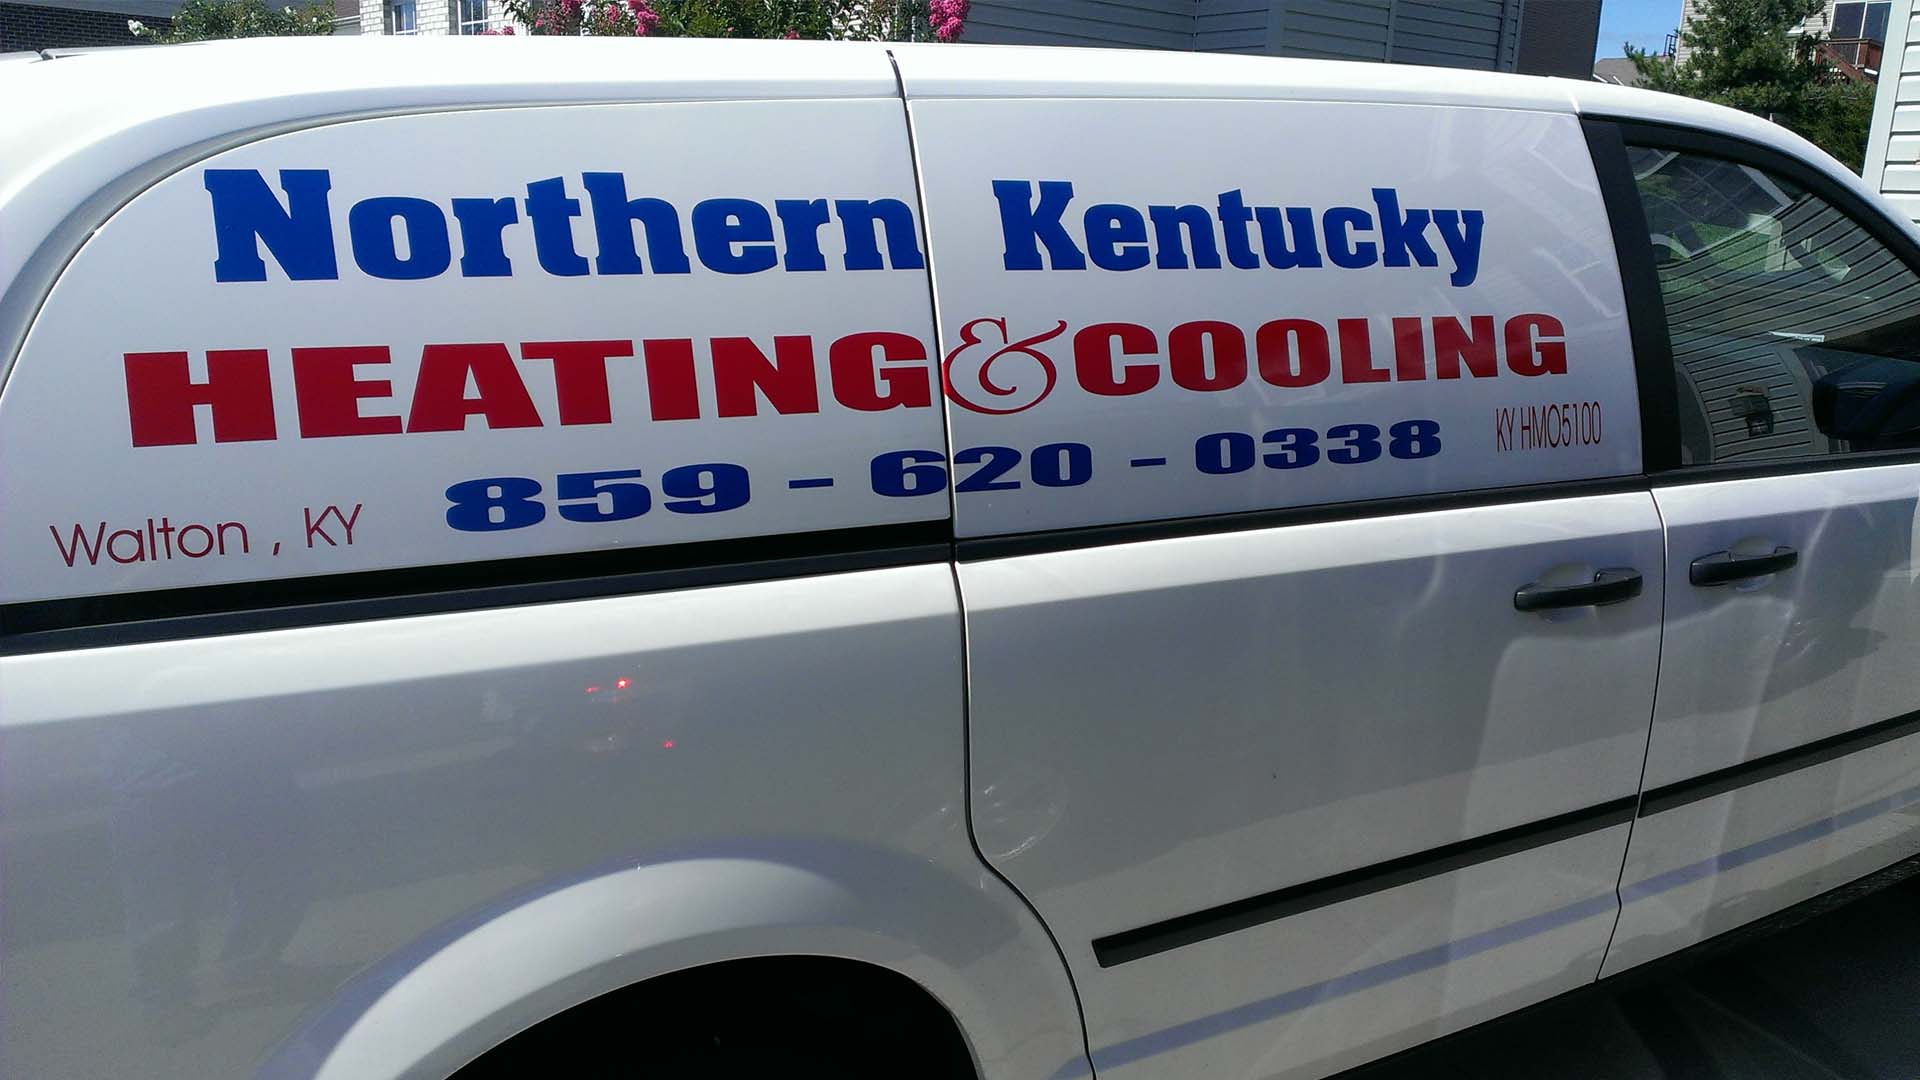 Northern Kentucky Heating & Cooling HVAC Services